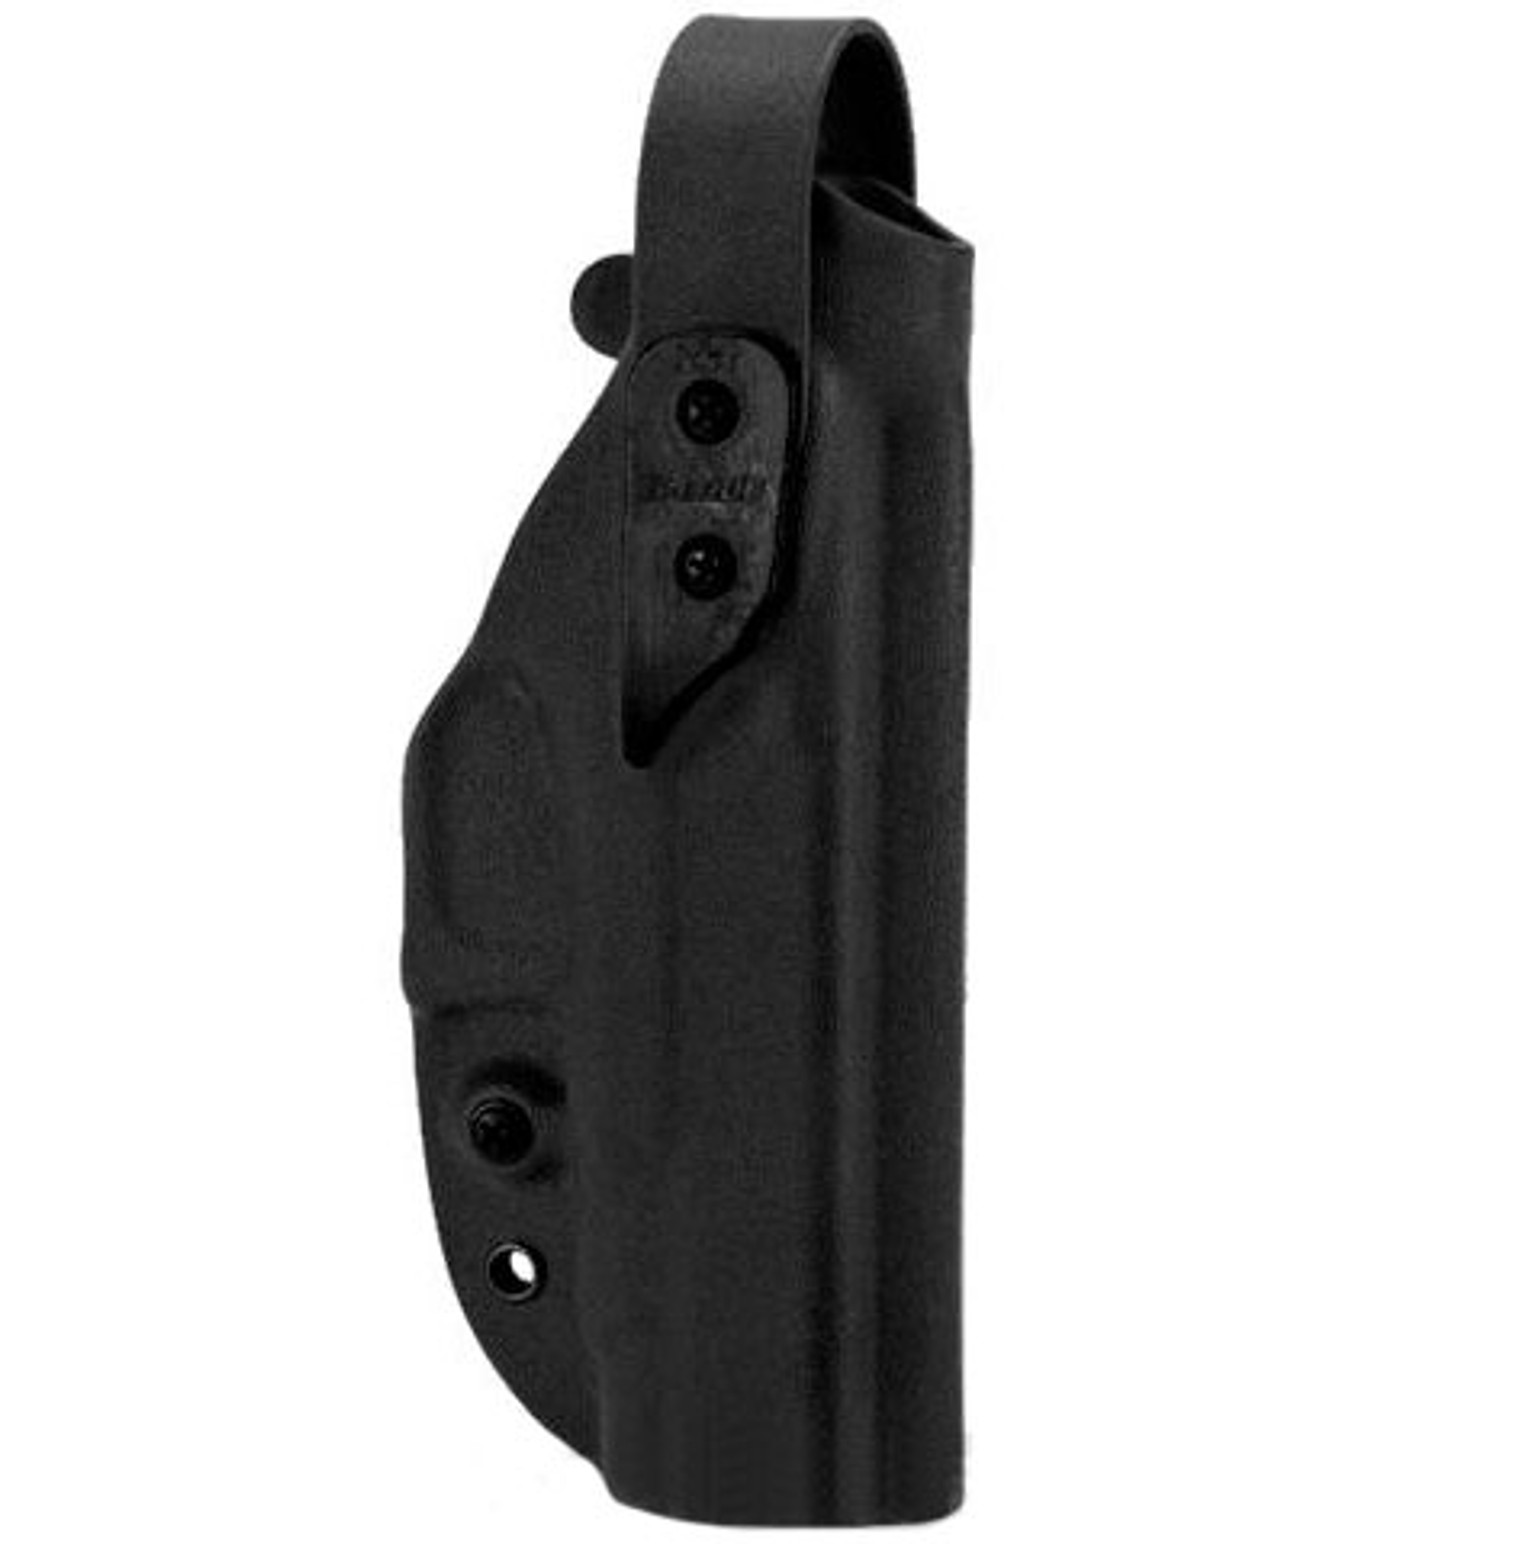 G-Code XST-RTI Kydex Holster for Glock 20 / 21 (Right / Black)